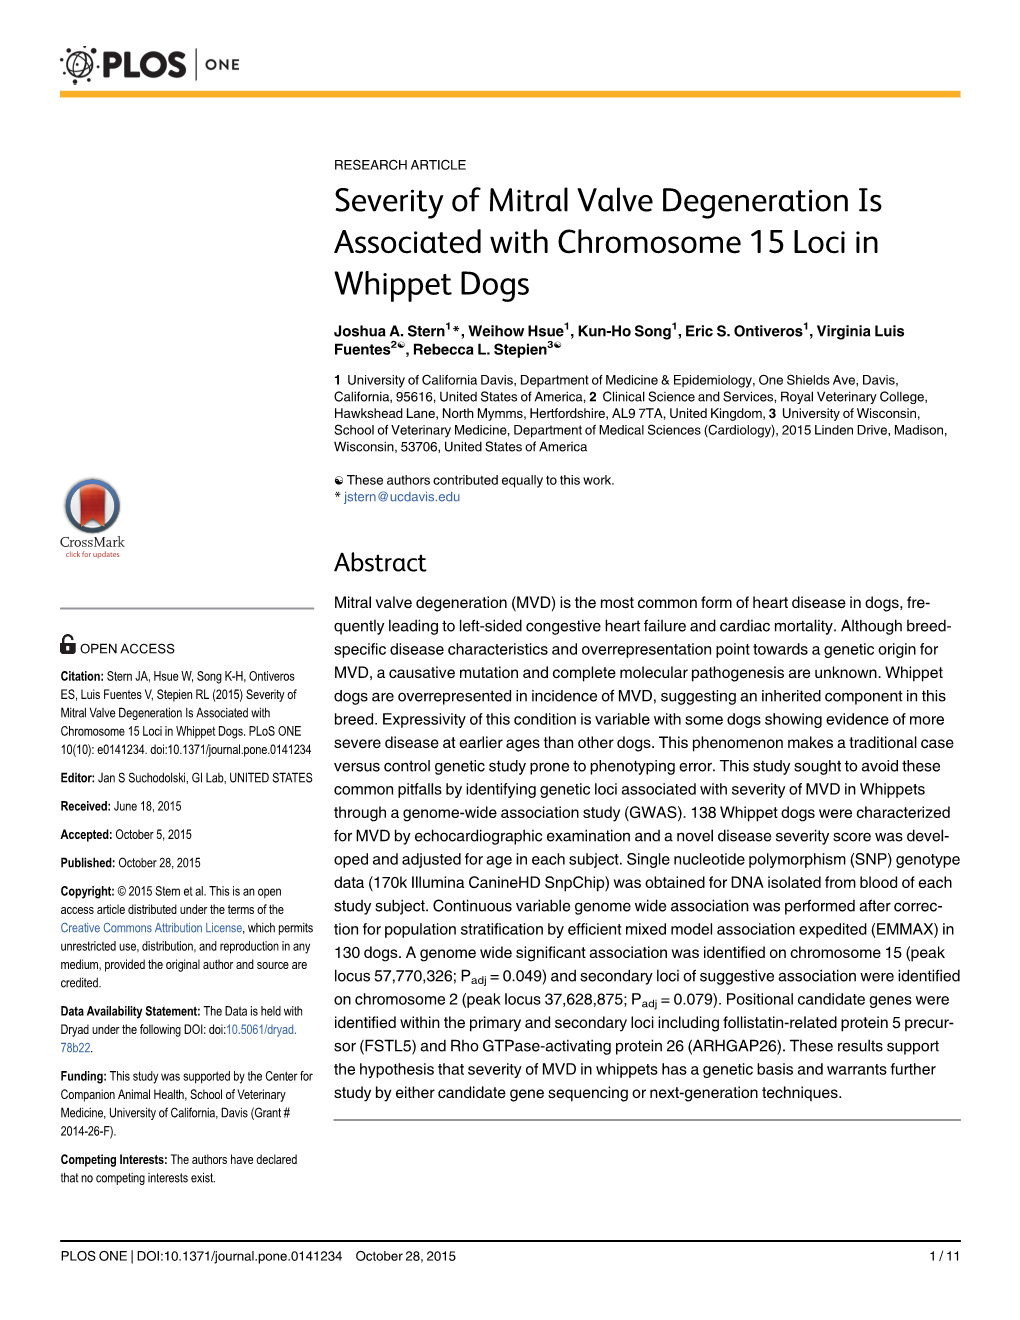 Severity of Mitral Valve Degeneration Is Associated with Chromosome 15 Loci in Whippet Dogs